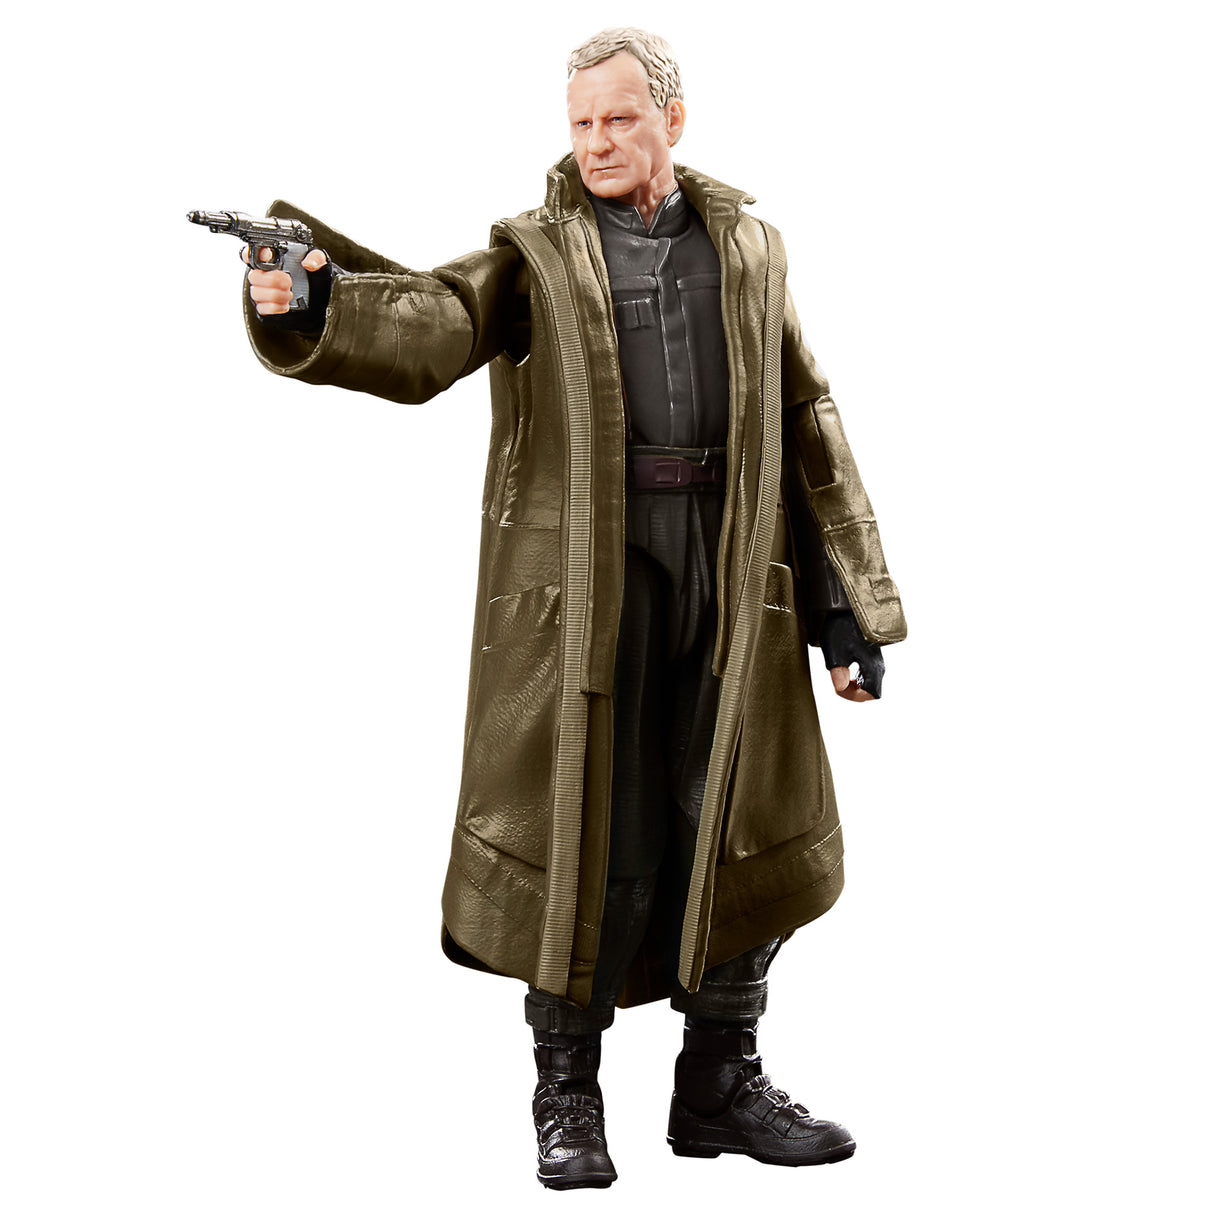 Star Wars The Black Series Luthen Rael Action Figure (6-inch)